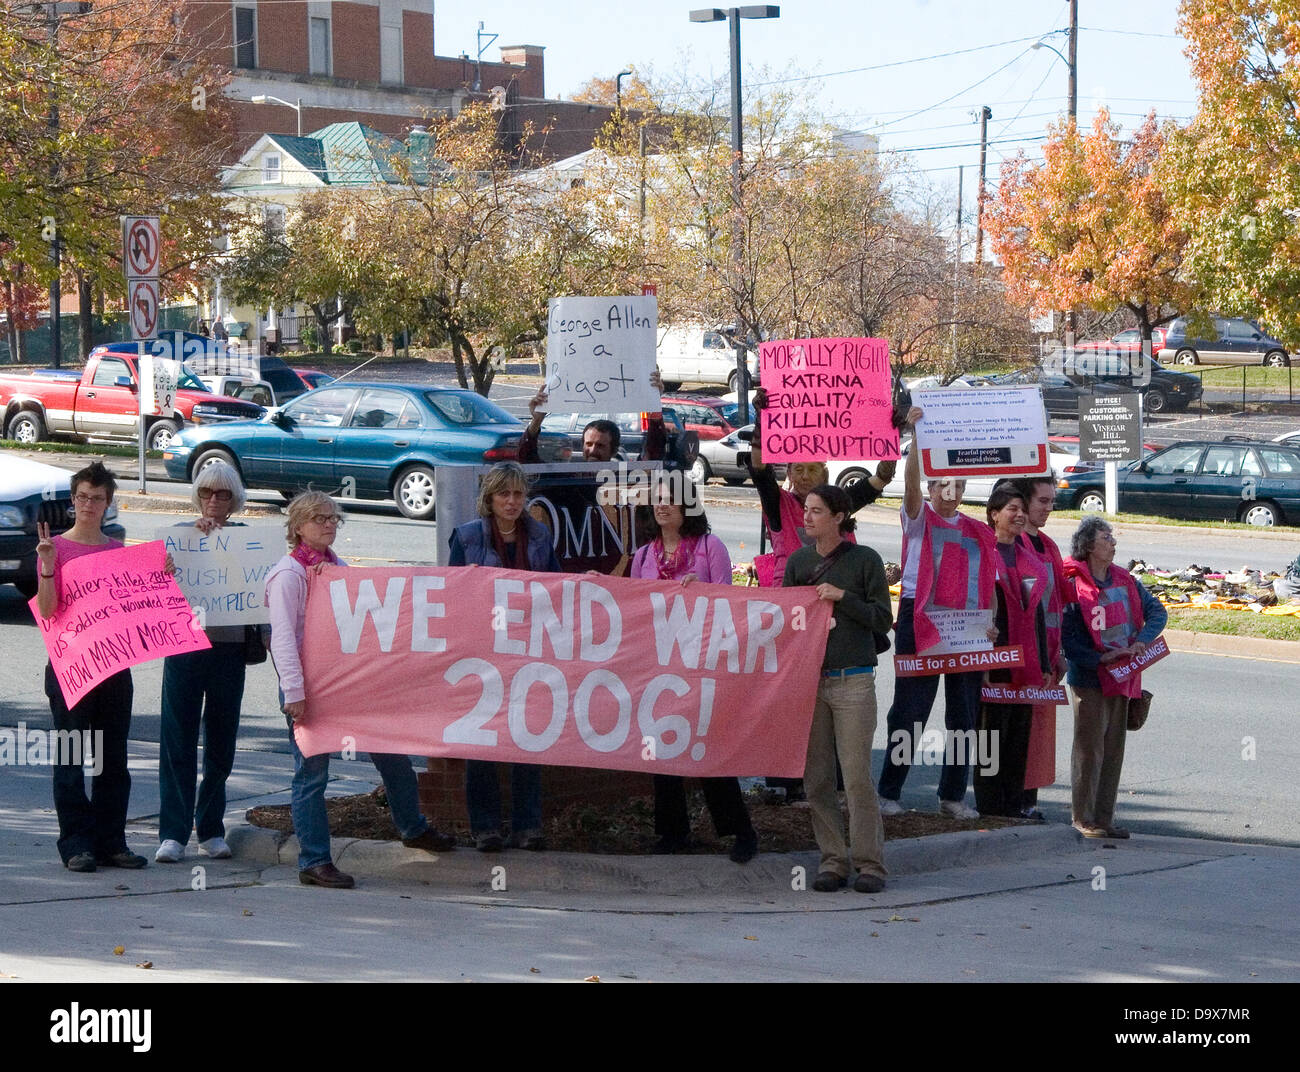 Members of Code Pink protest outside a campaign event by Senator George Allen, in Charlottesville, VA, October 31, 2006. Stock Photo